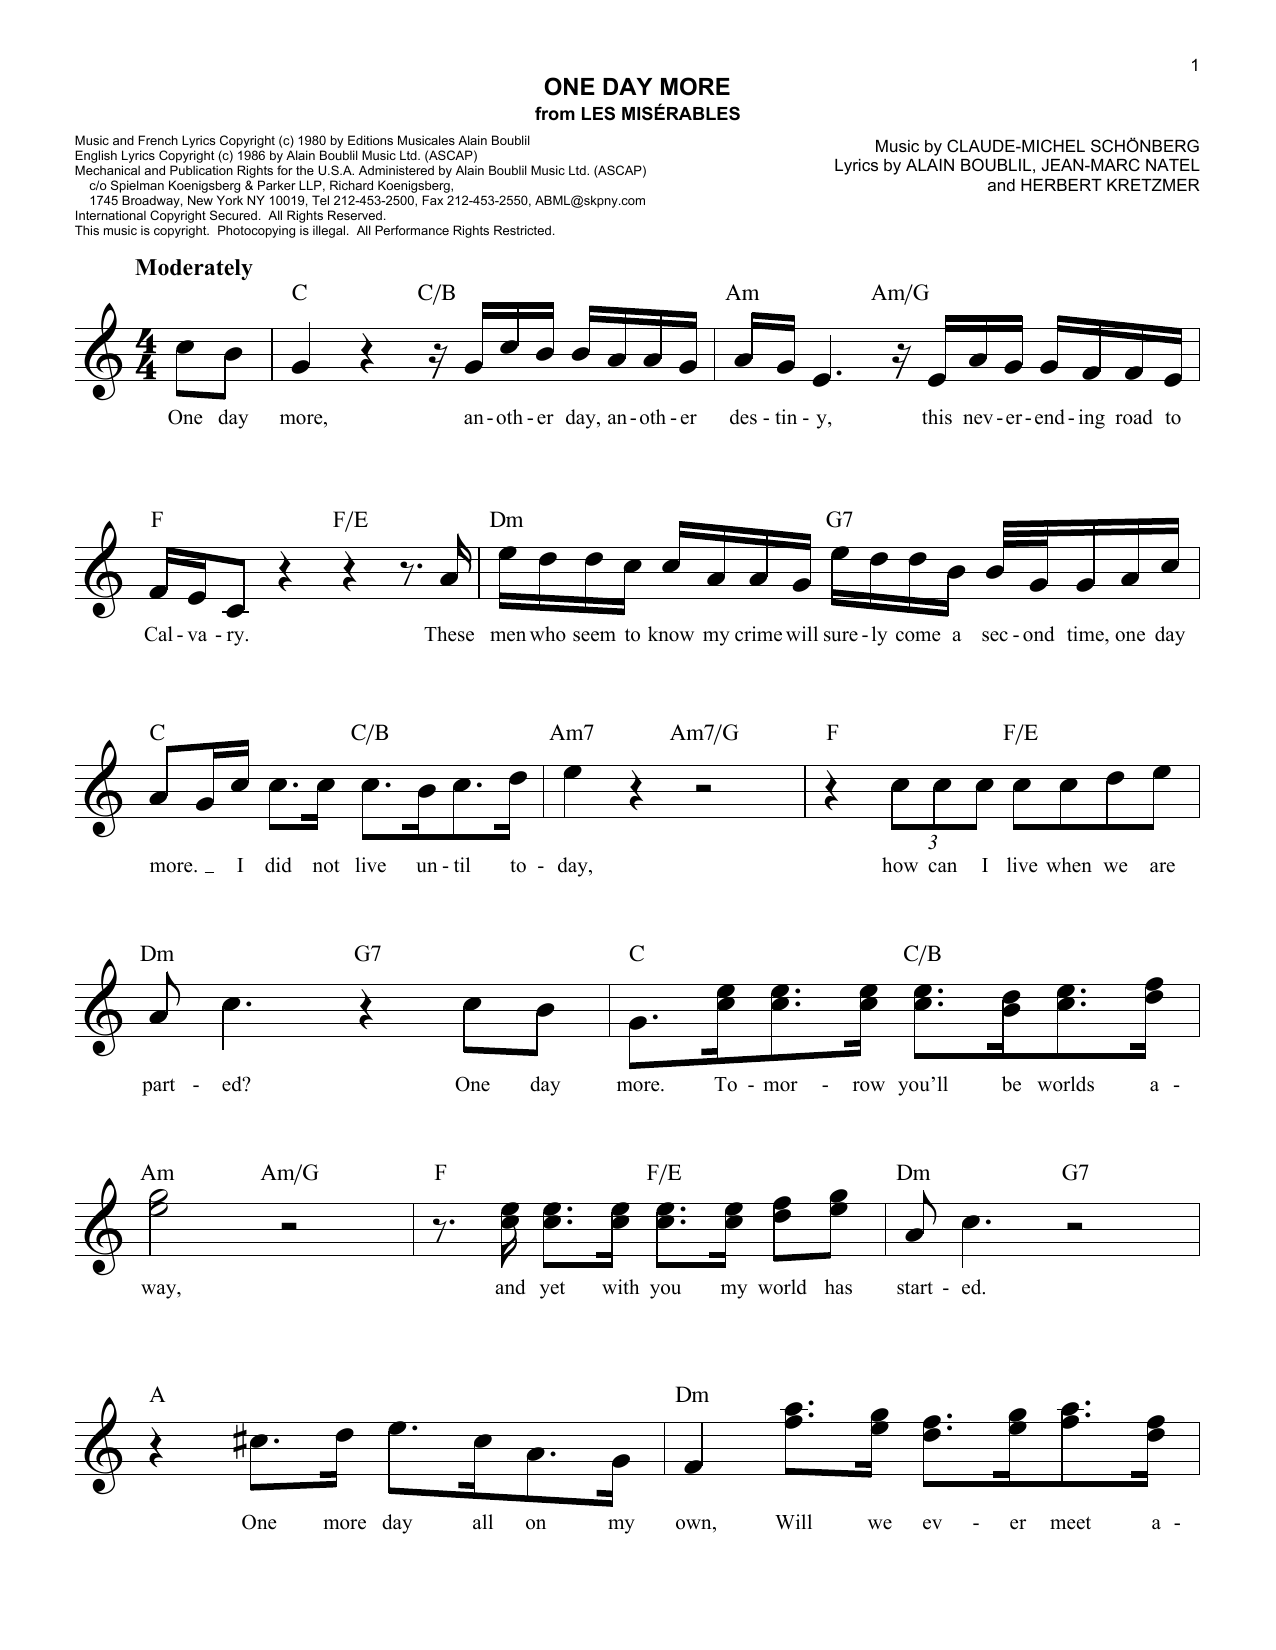 Claude Michel Schonberg One Day More From Les Miserables Sheet Music Download Pdf Score